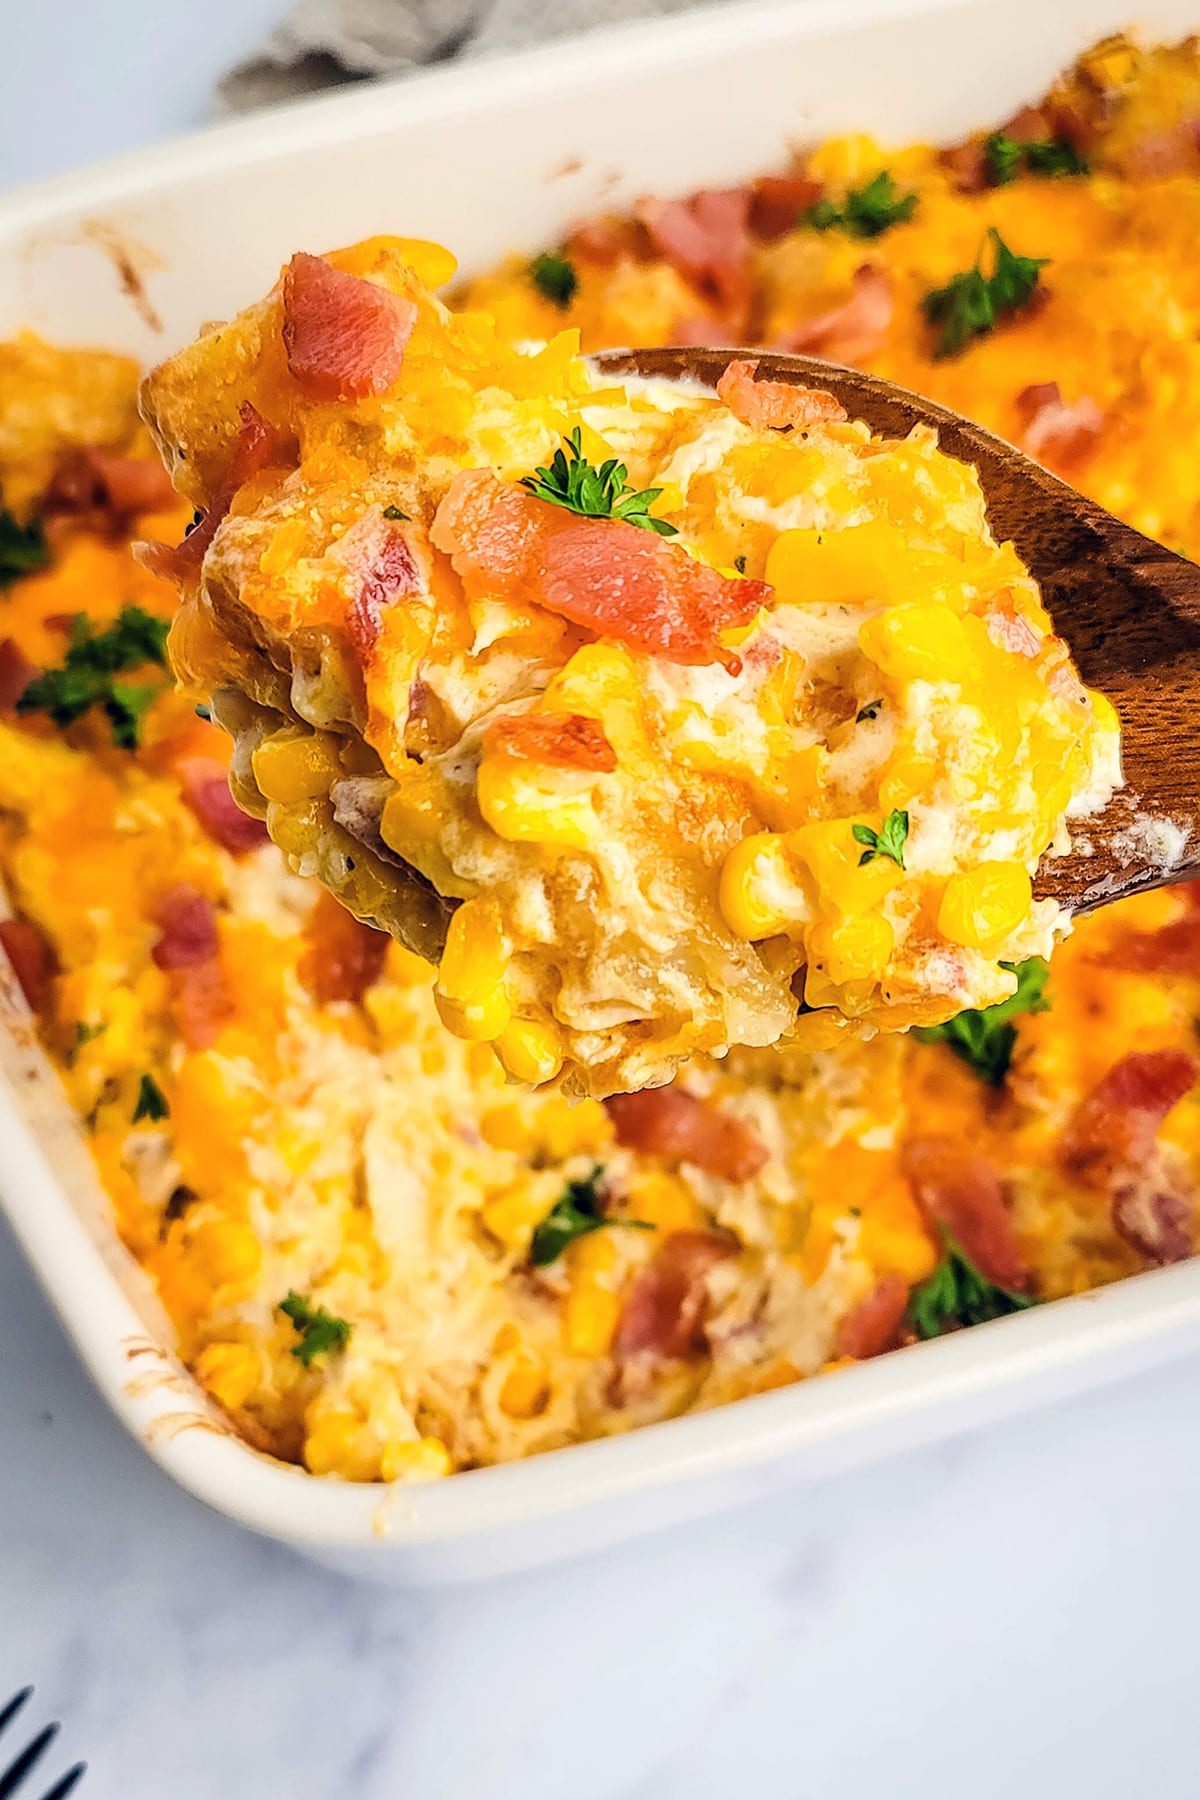 Chicken tater tot casserole with grilled cheese and crispy bacon in a baking dish